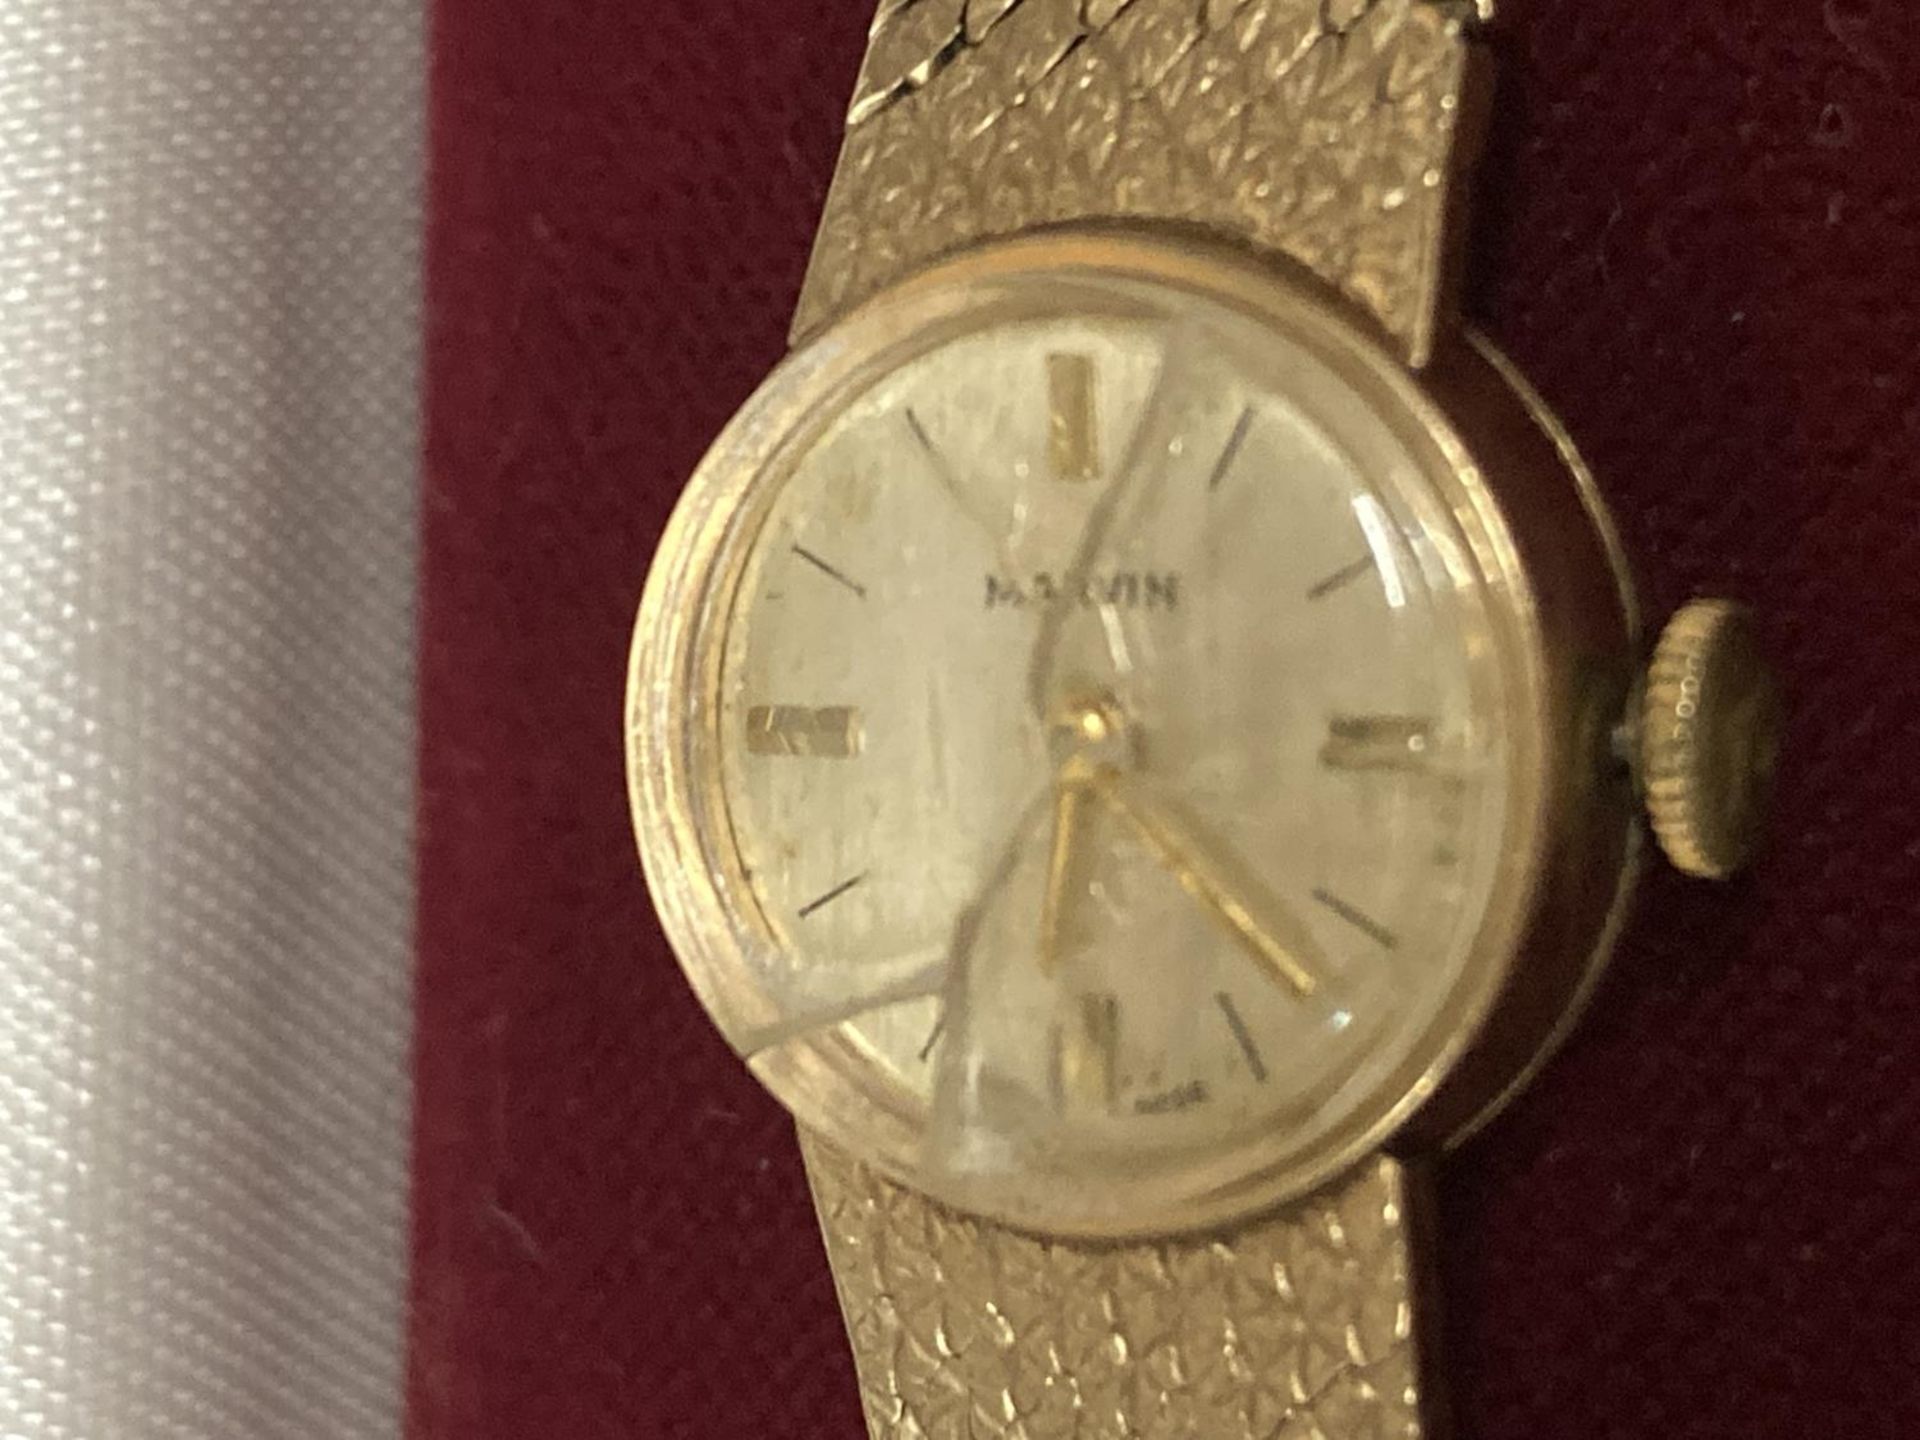 A VINTAGE MARVIN LADIES' WRIST WATCH WITH 9 CARAT GOLD CASE - Image 2 of 5